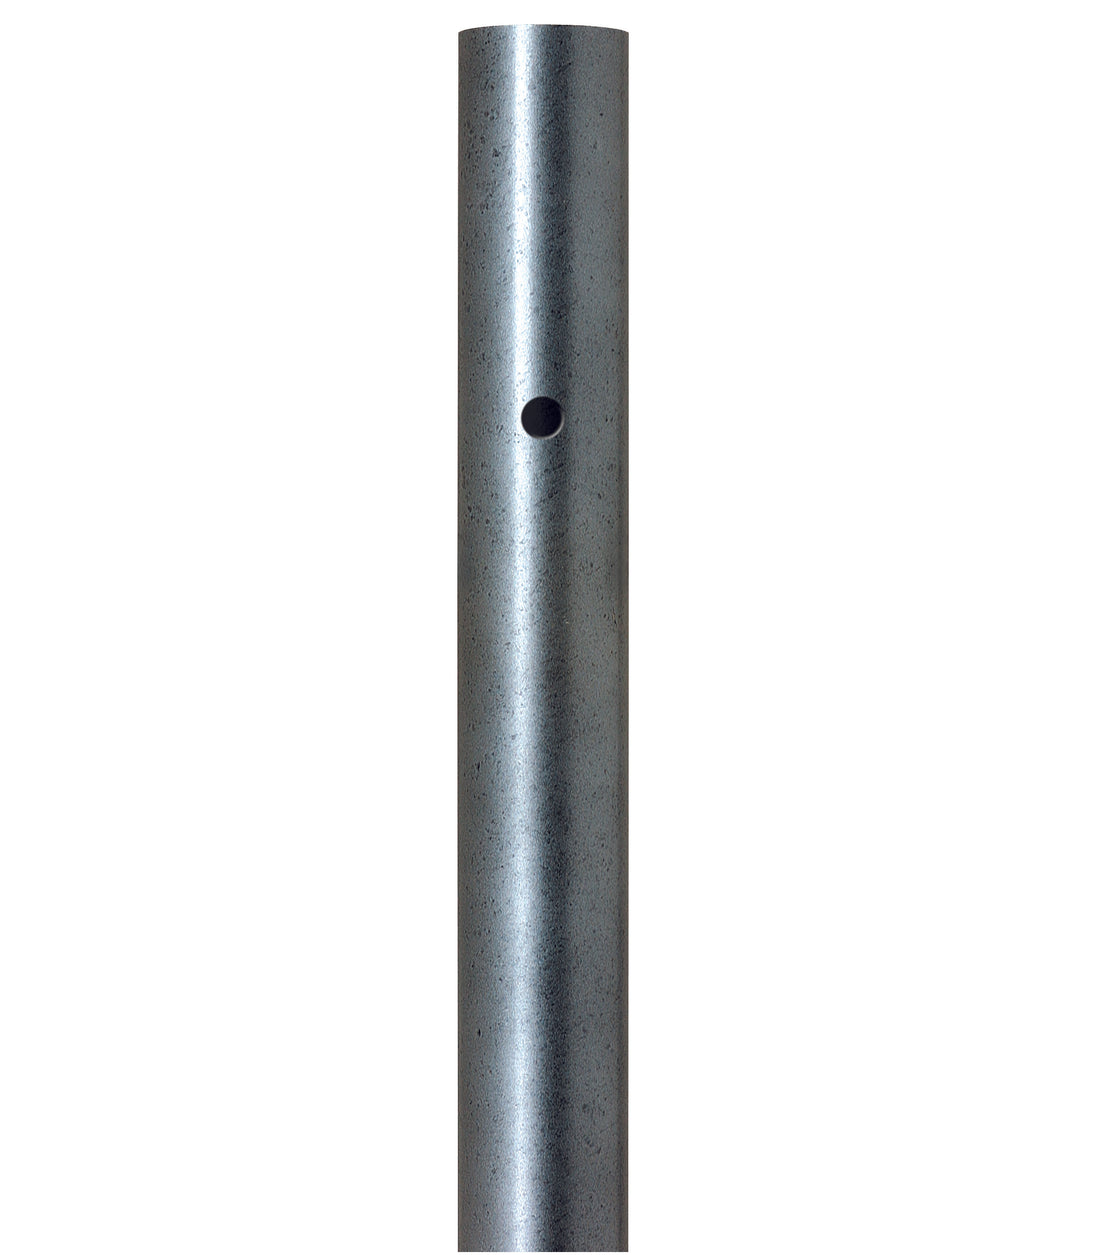 Manufacturing option HR - Post hole for photocell